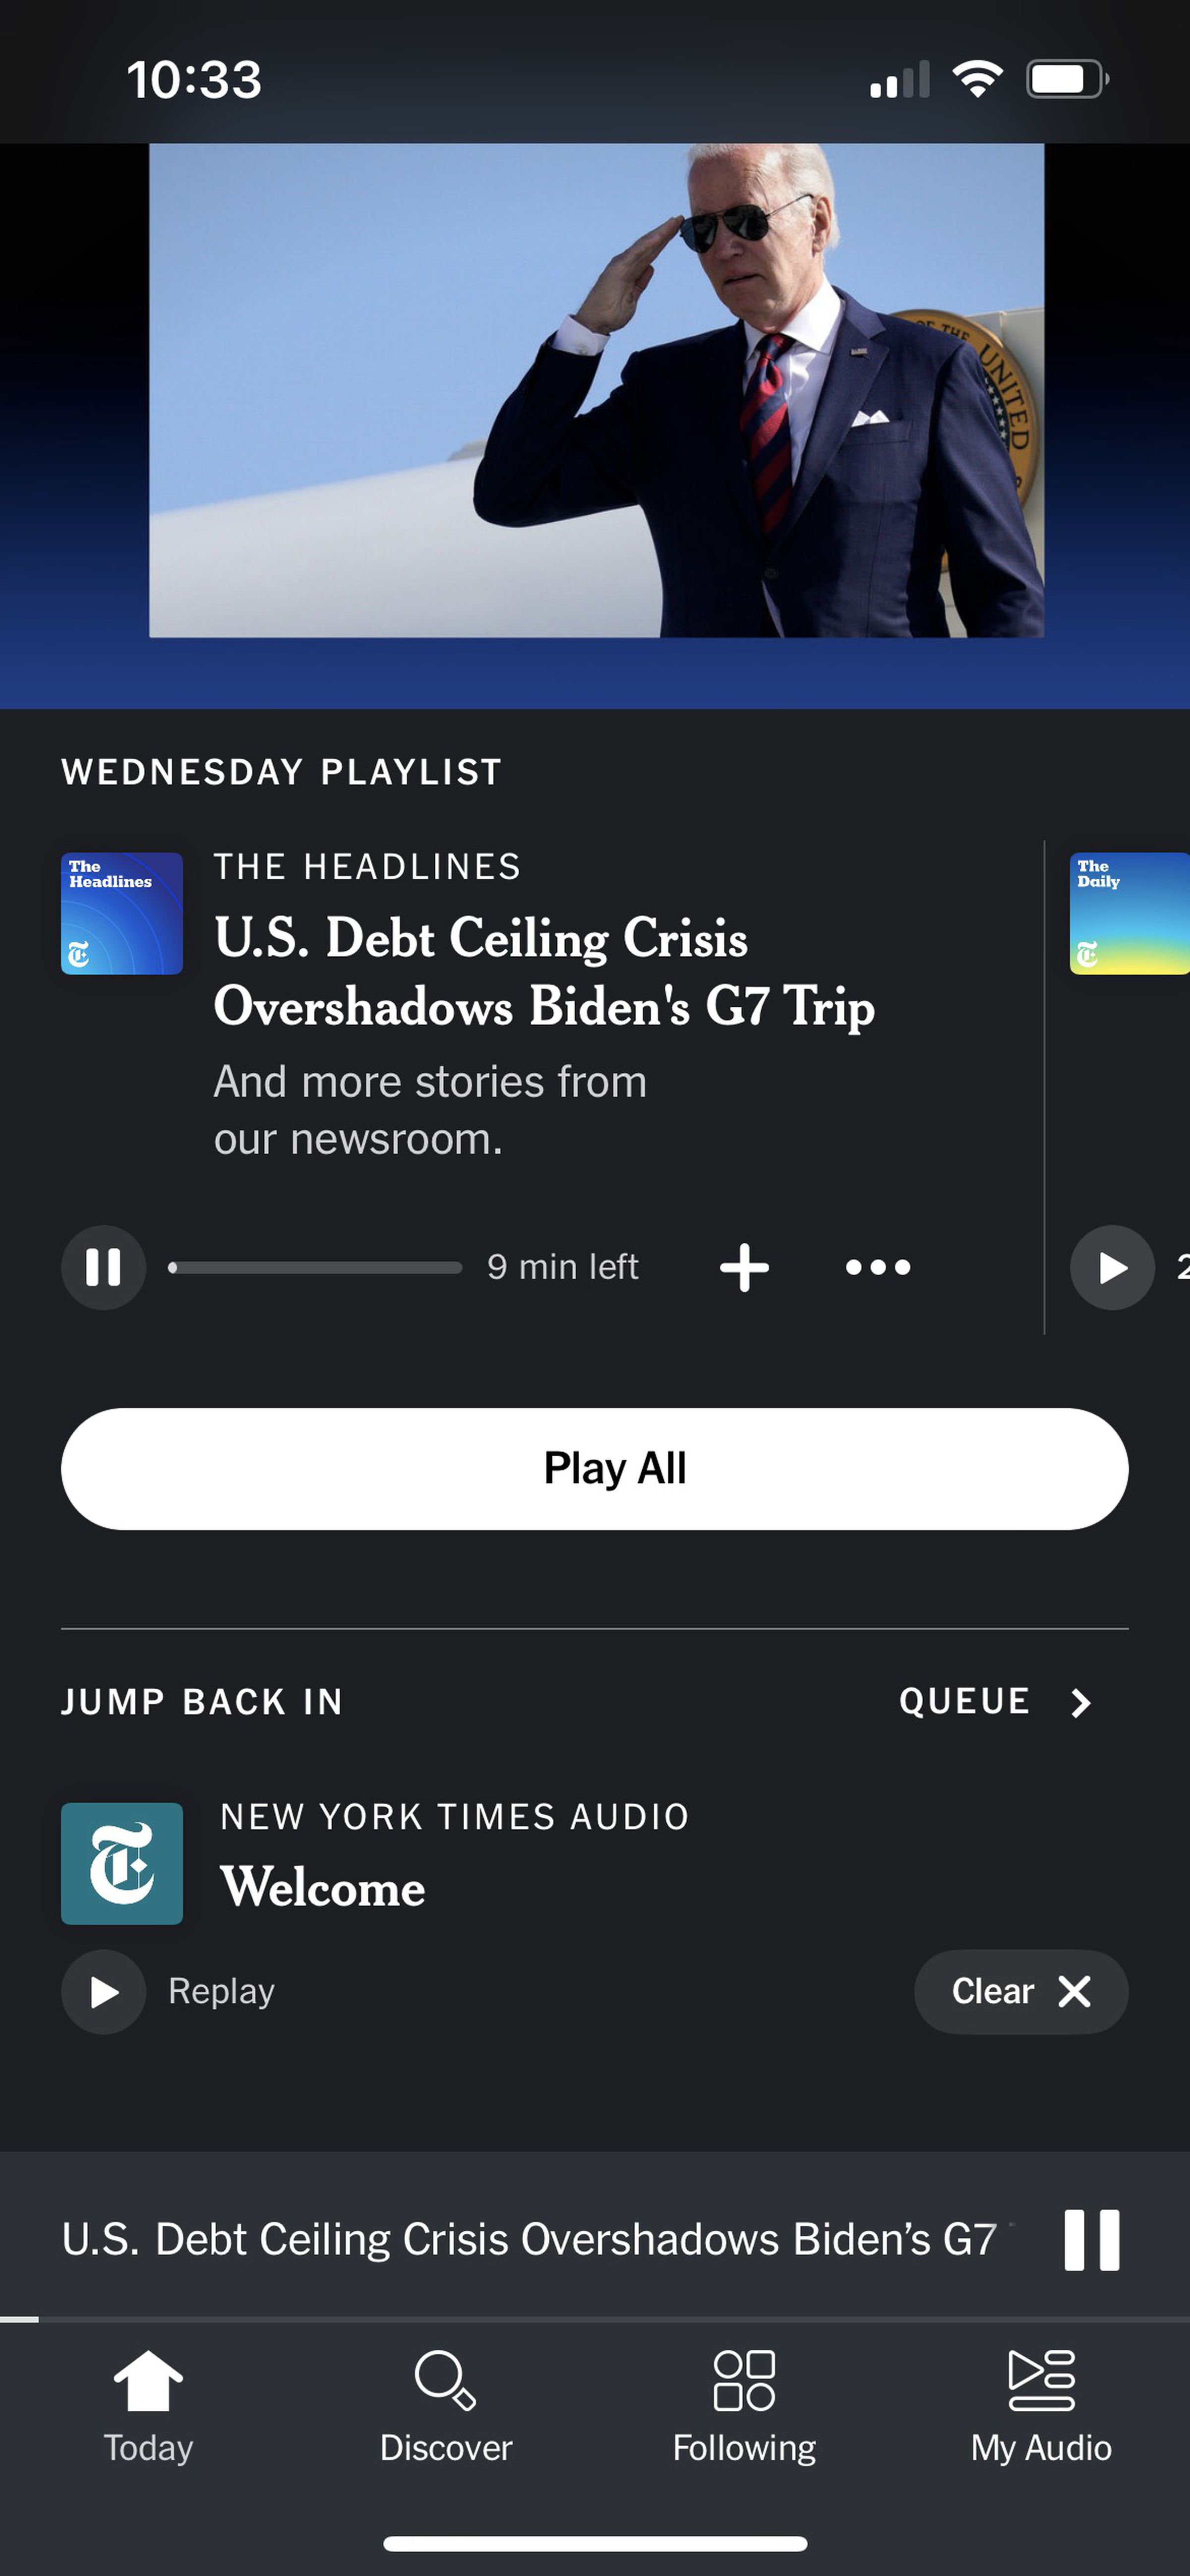 A screenshot of the New York Times Audio app for iOS.